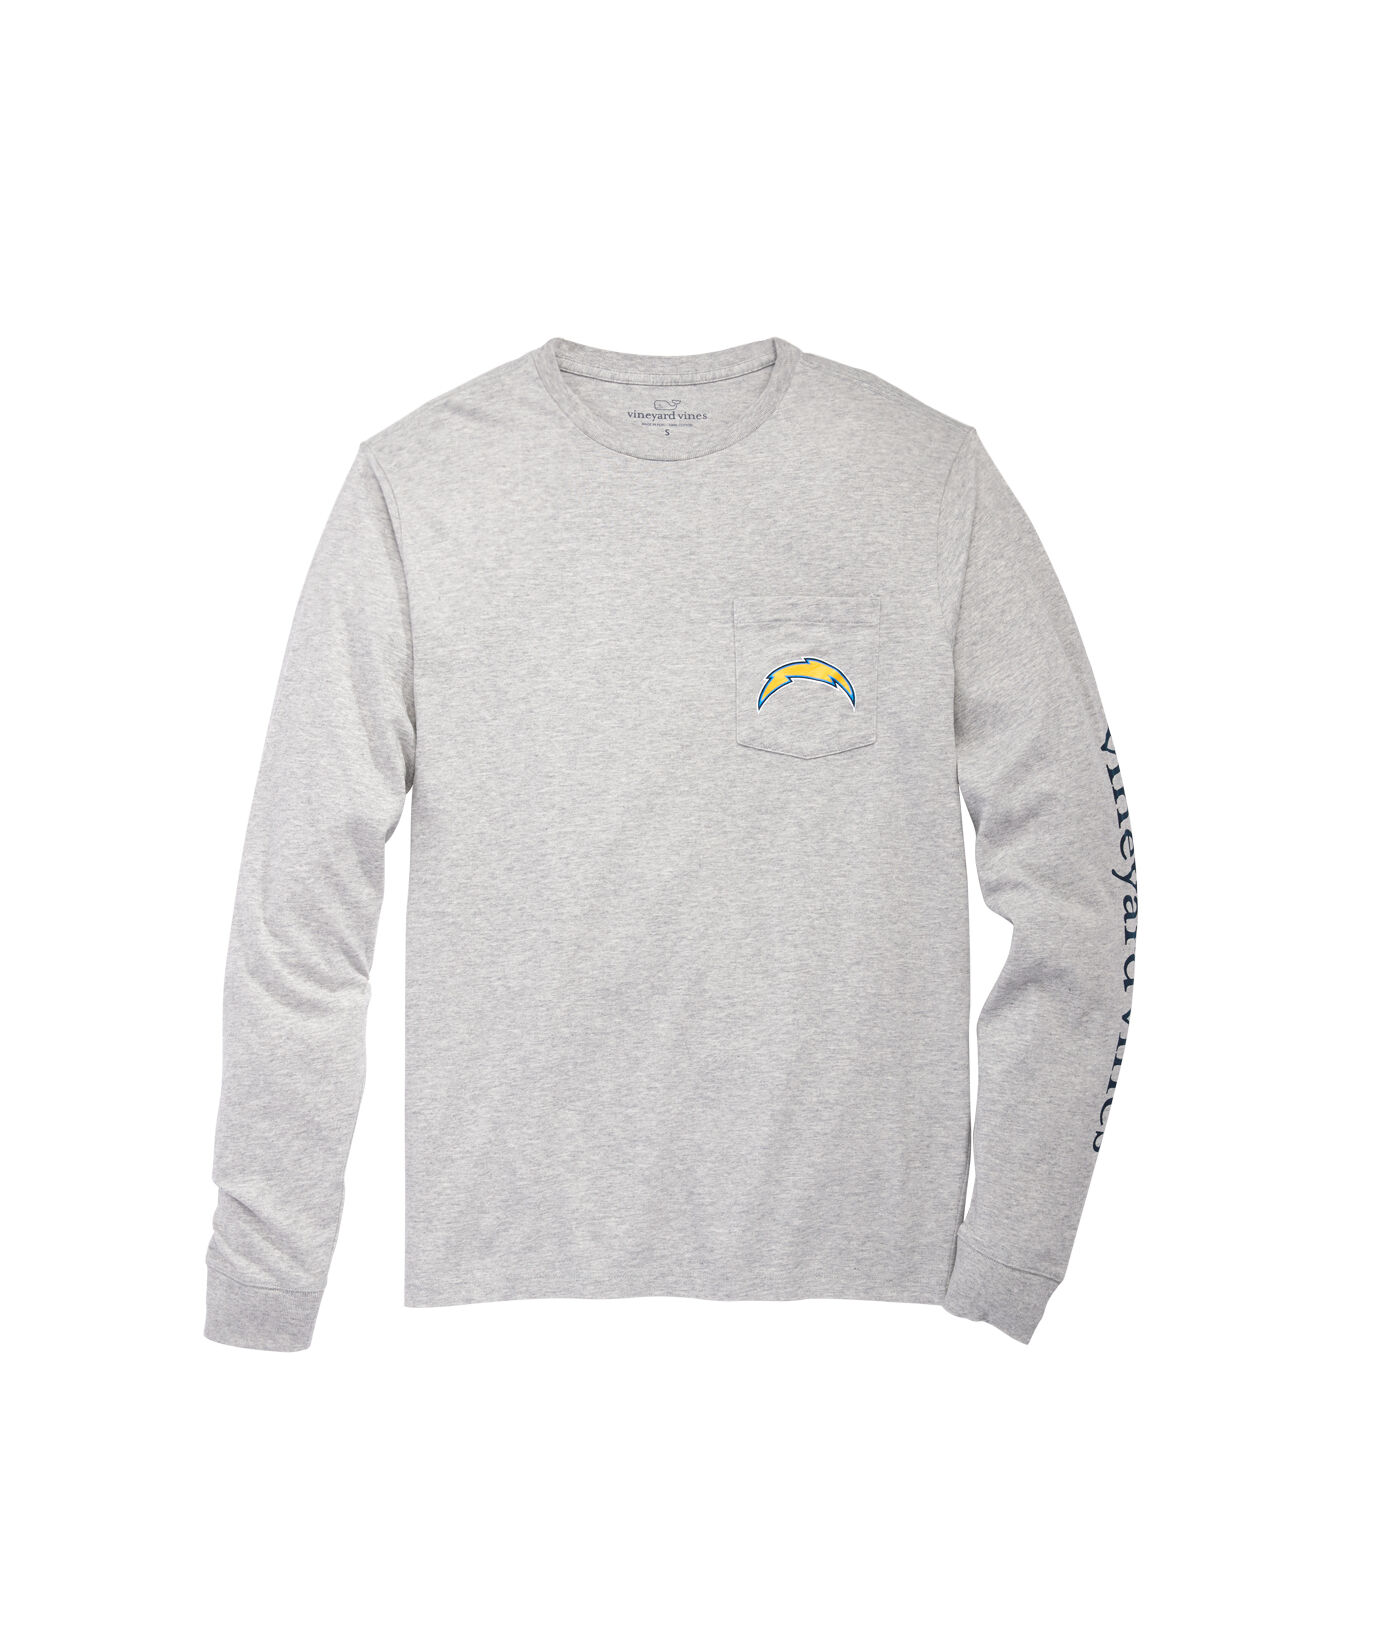 chargers long sleeve t shirt